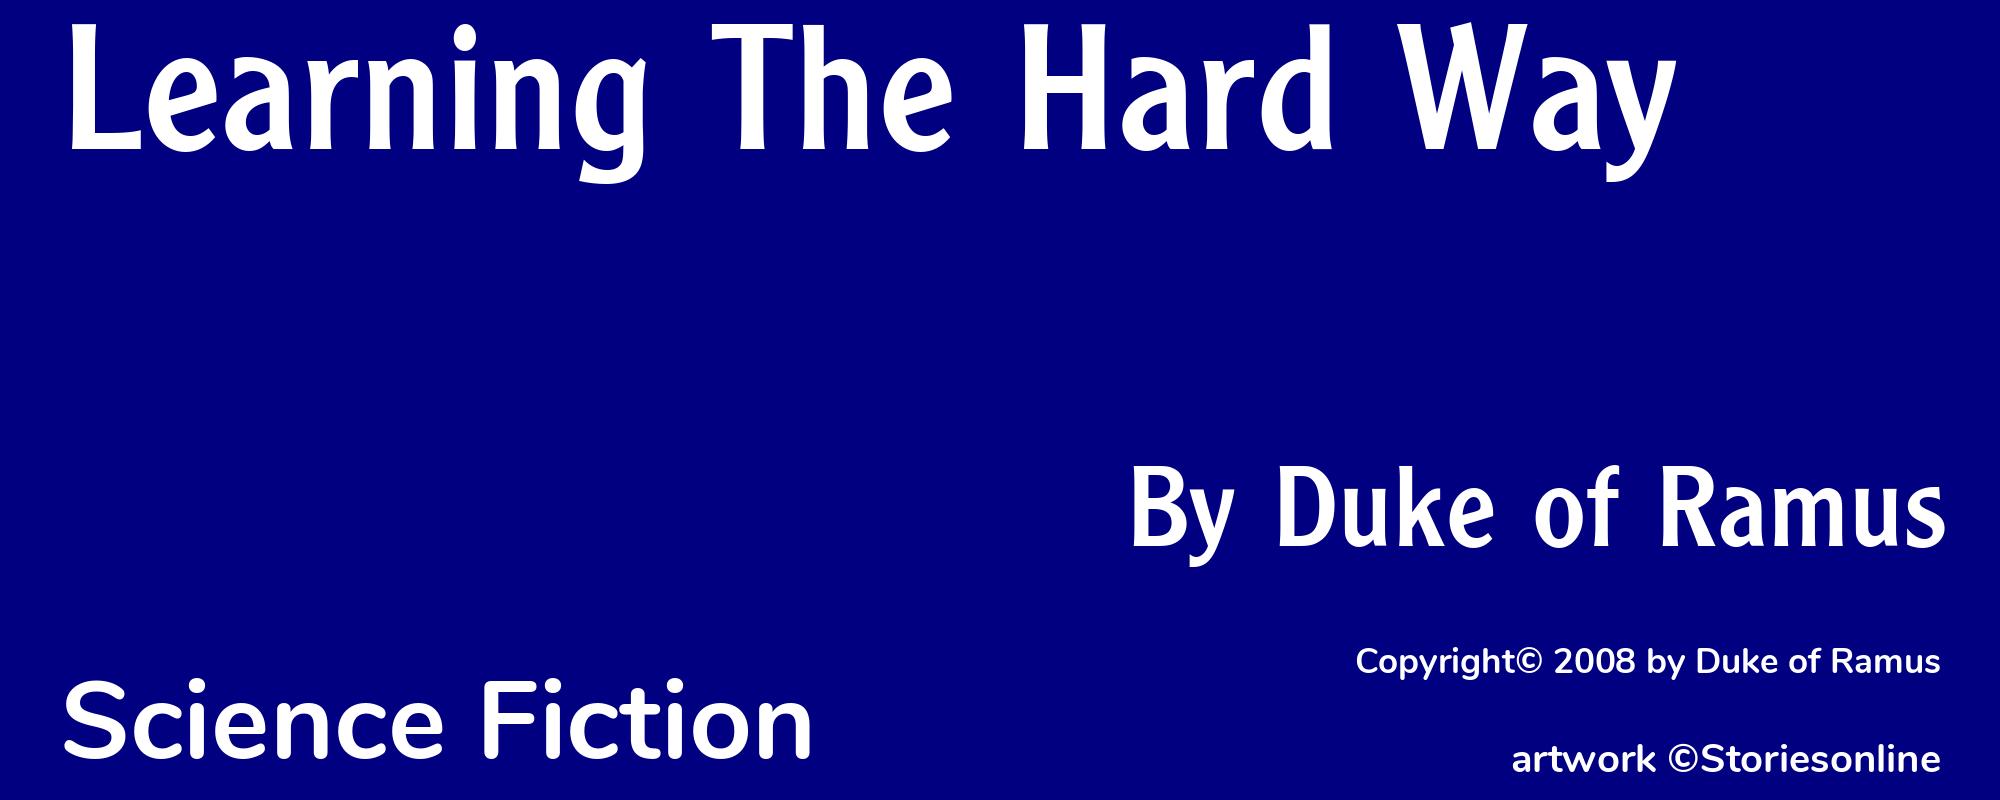 Learning The Hard Way - Cover